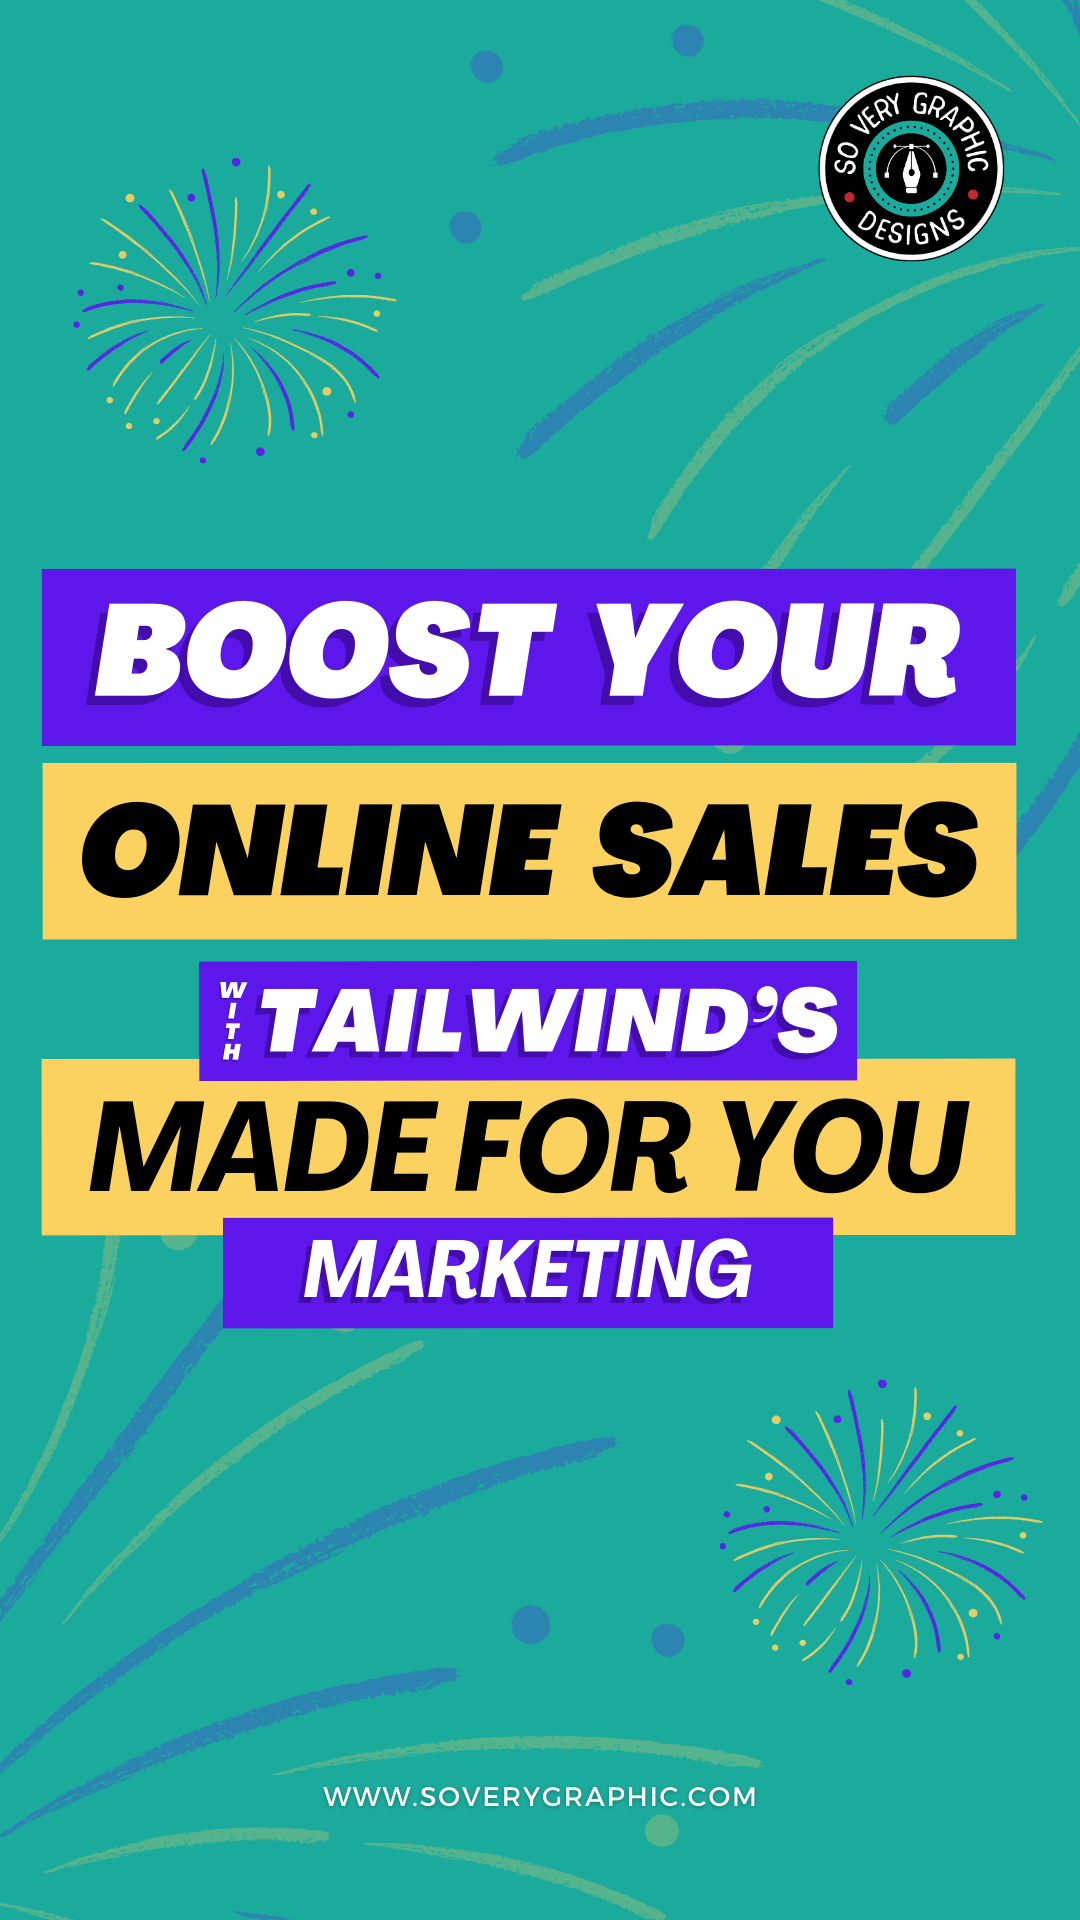 Boost Your Online Sales with Tailwind's 'Made For You' Feature